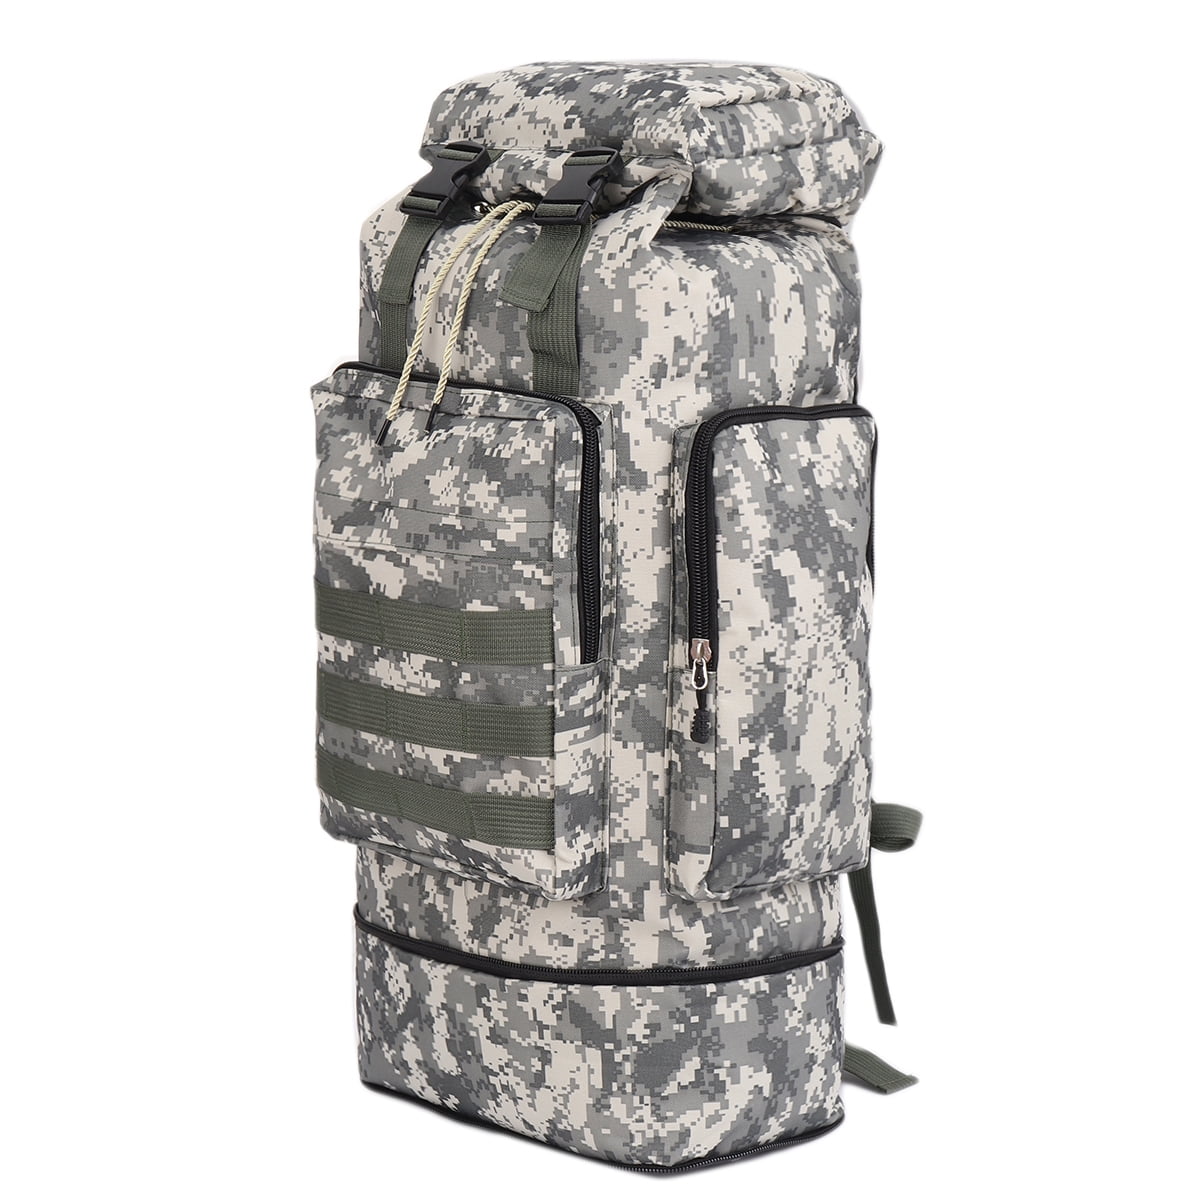 Details about   Hiking Backpack 70L Capacity Outdoor Sports Military Tactical Camping Waterproof 